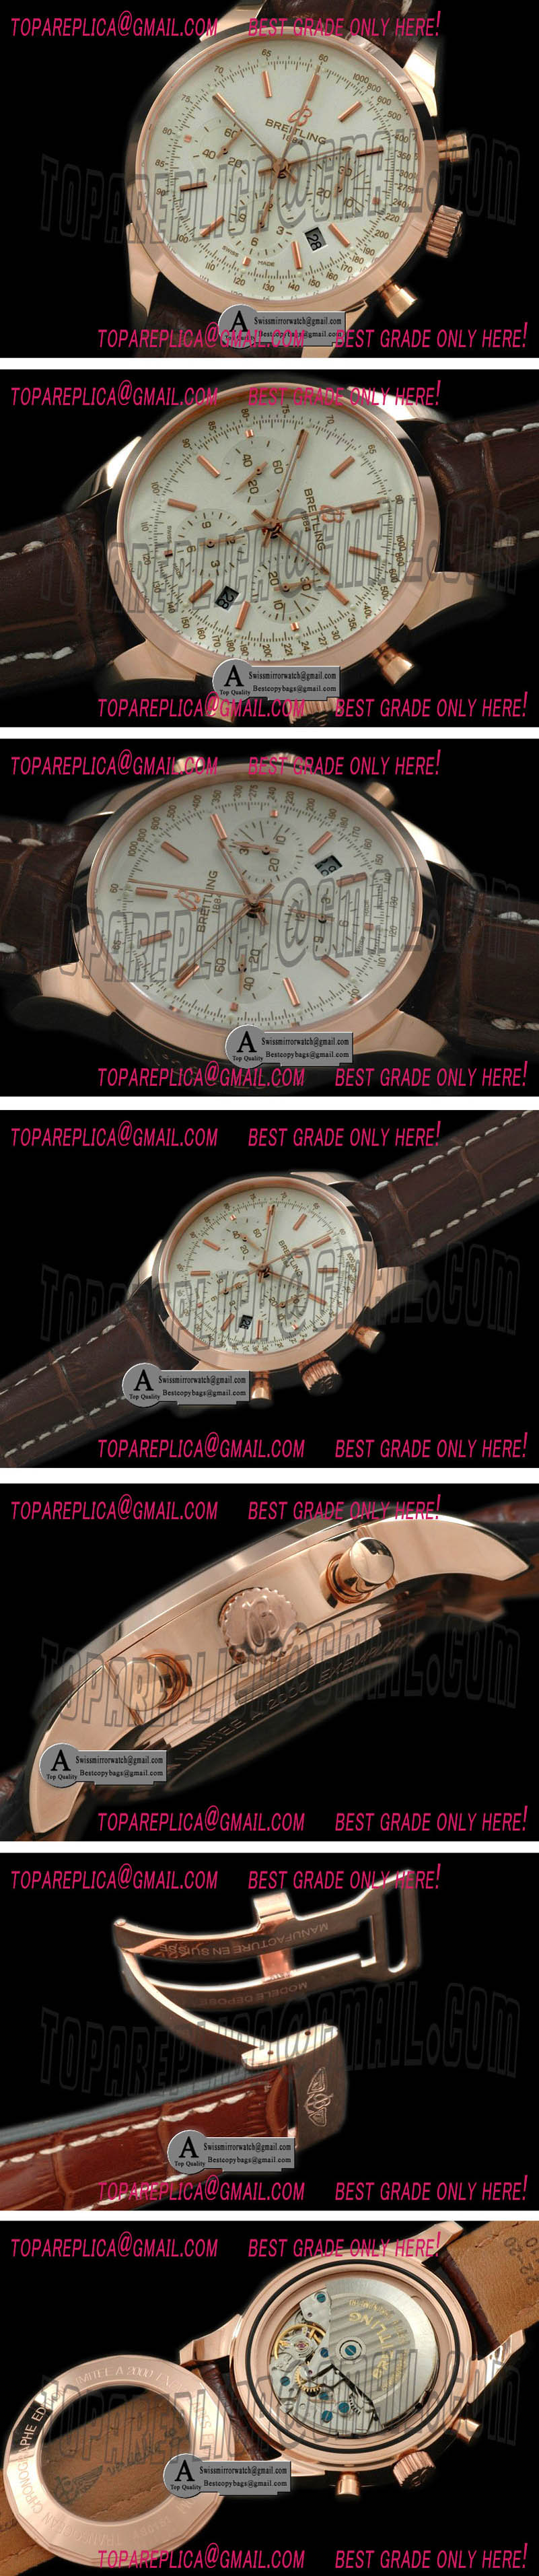 Breitling RB015112/G716 TransOcean Chrono Men Rose Gold/Leather White A-7750 28800bph Replica Watches